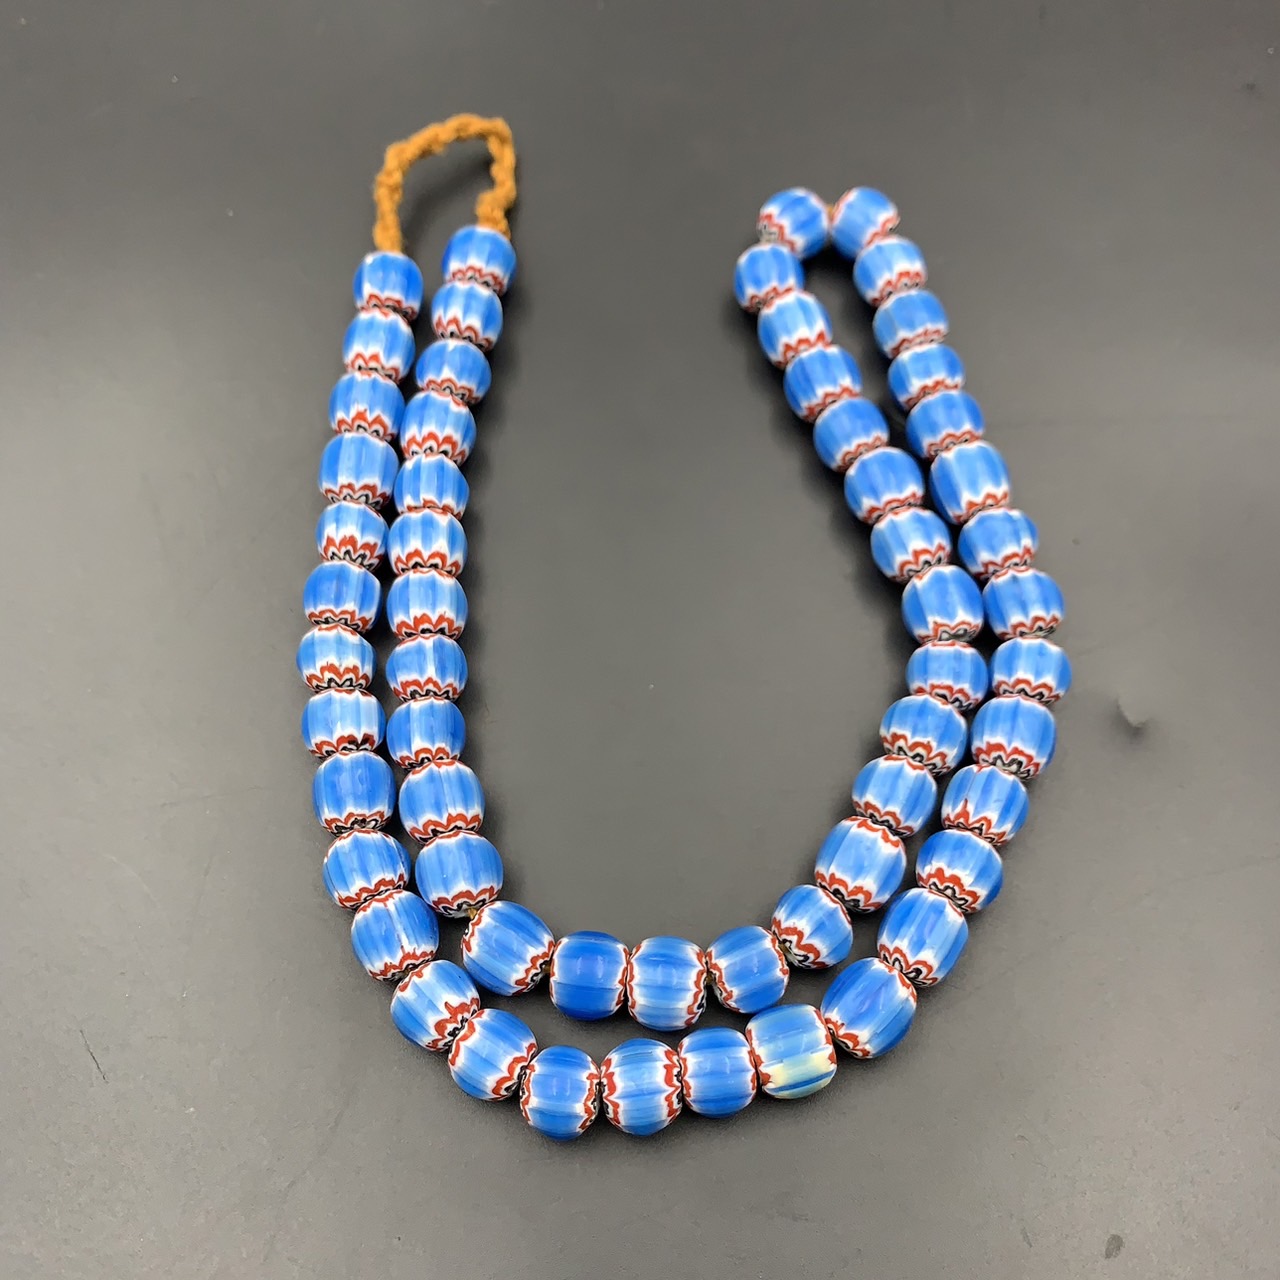 Awesome Sky Blue Vintage Chevron Trade Glass Beads Strand, African Glass Beads, LPBR-0319 - Image 3 of 7